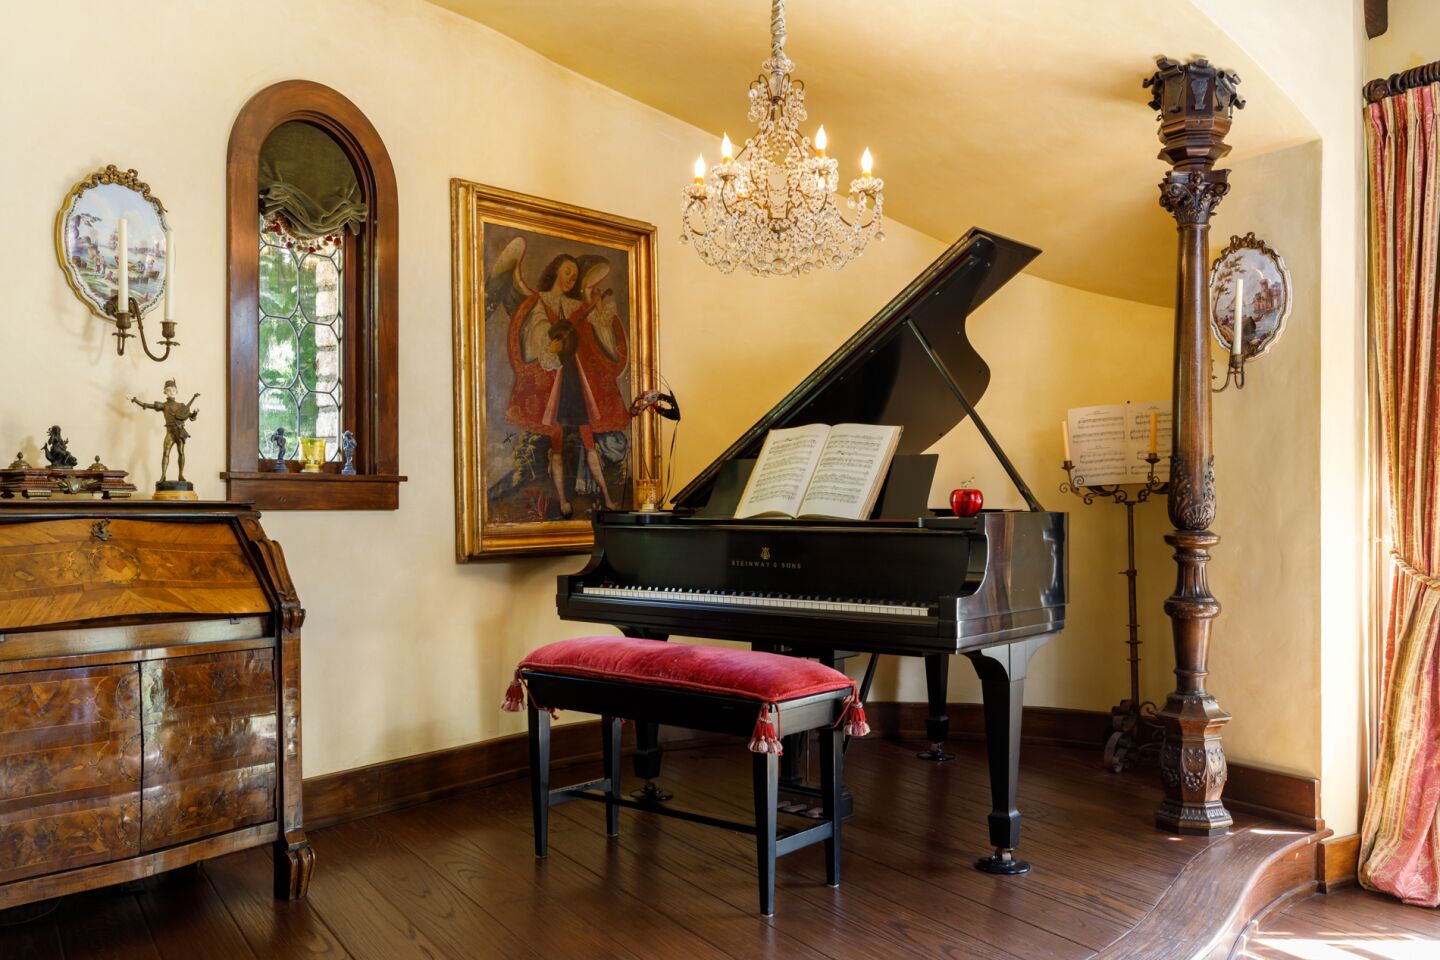 A piano in a room.